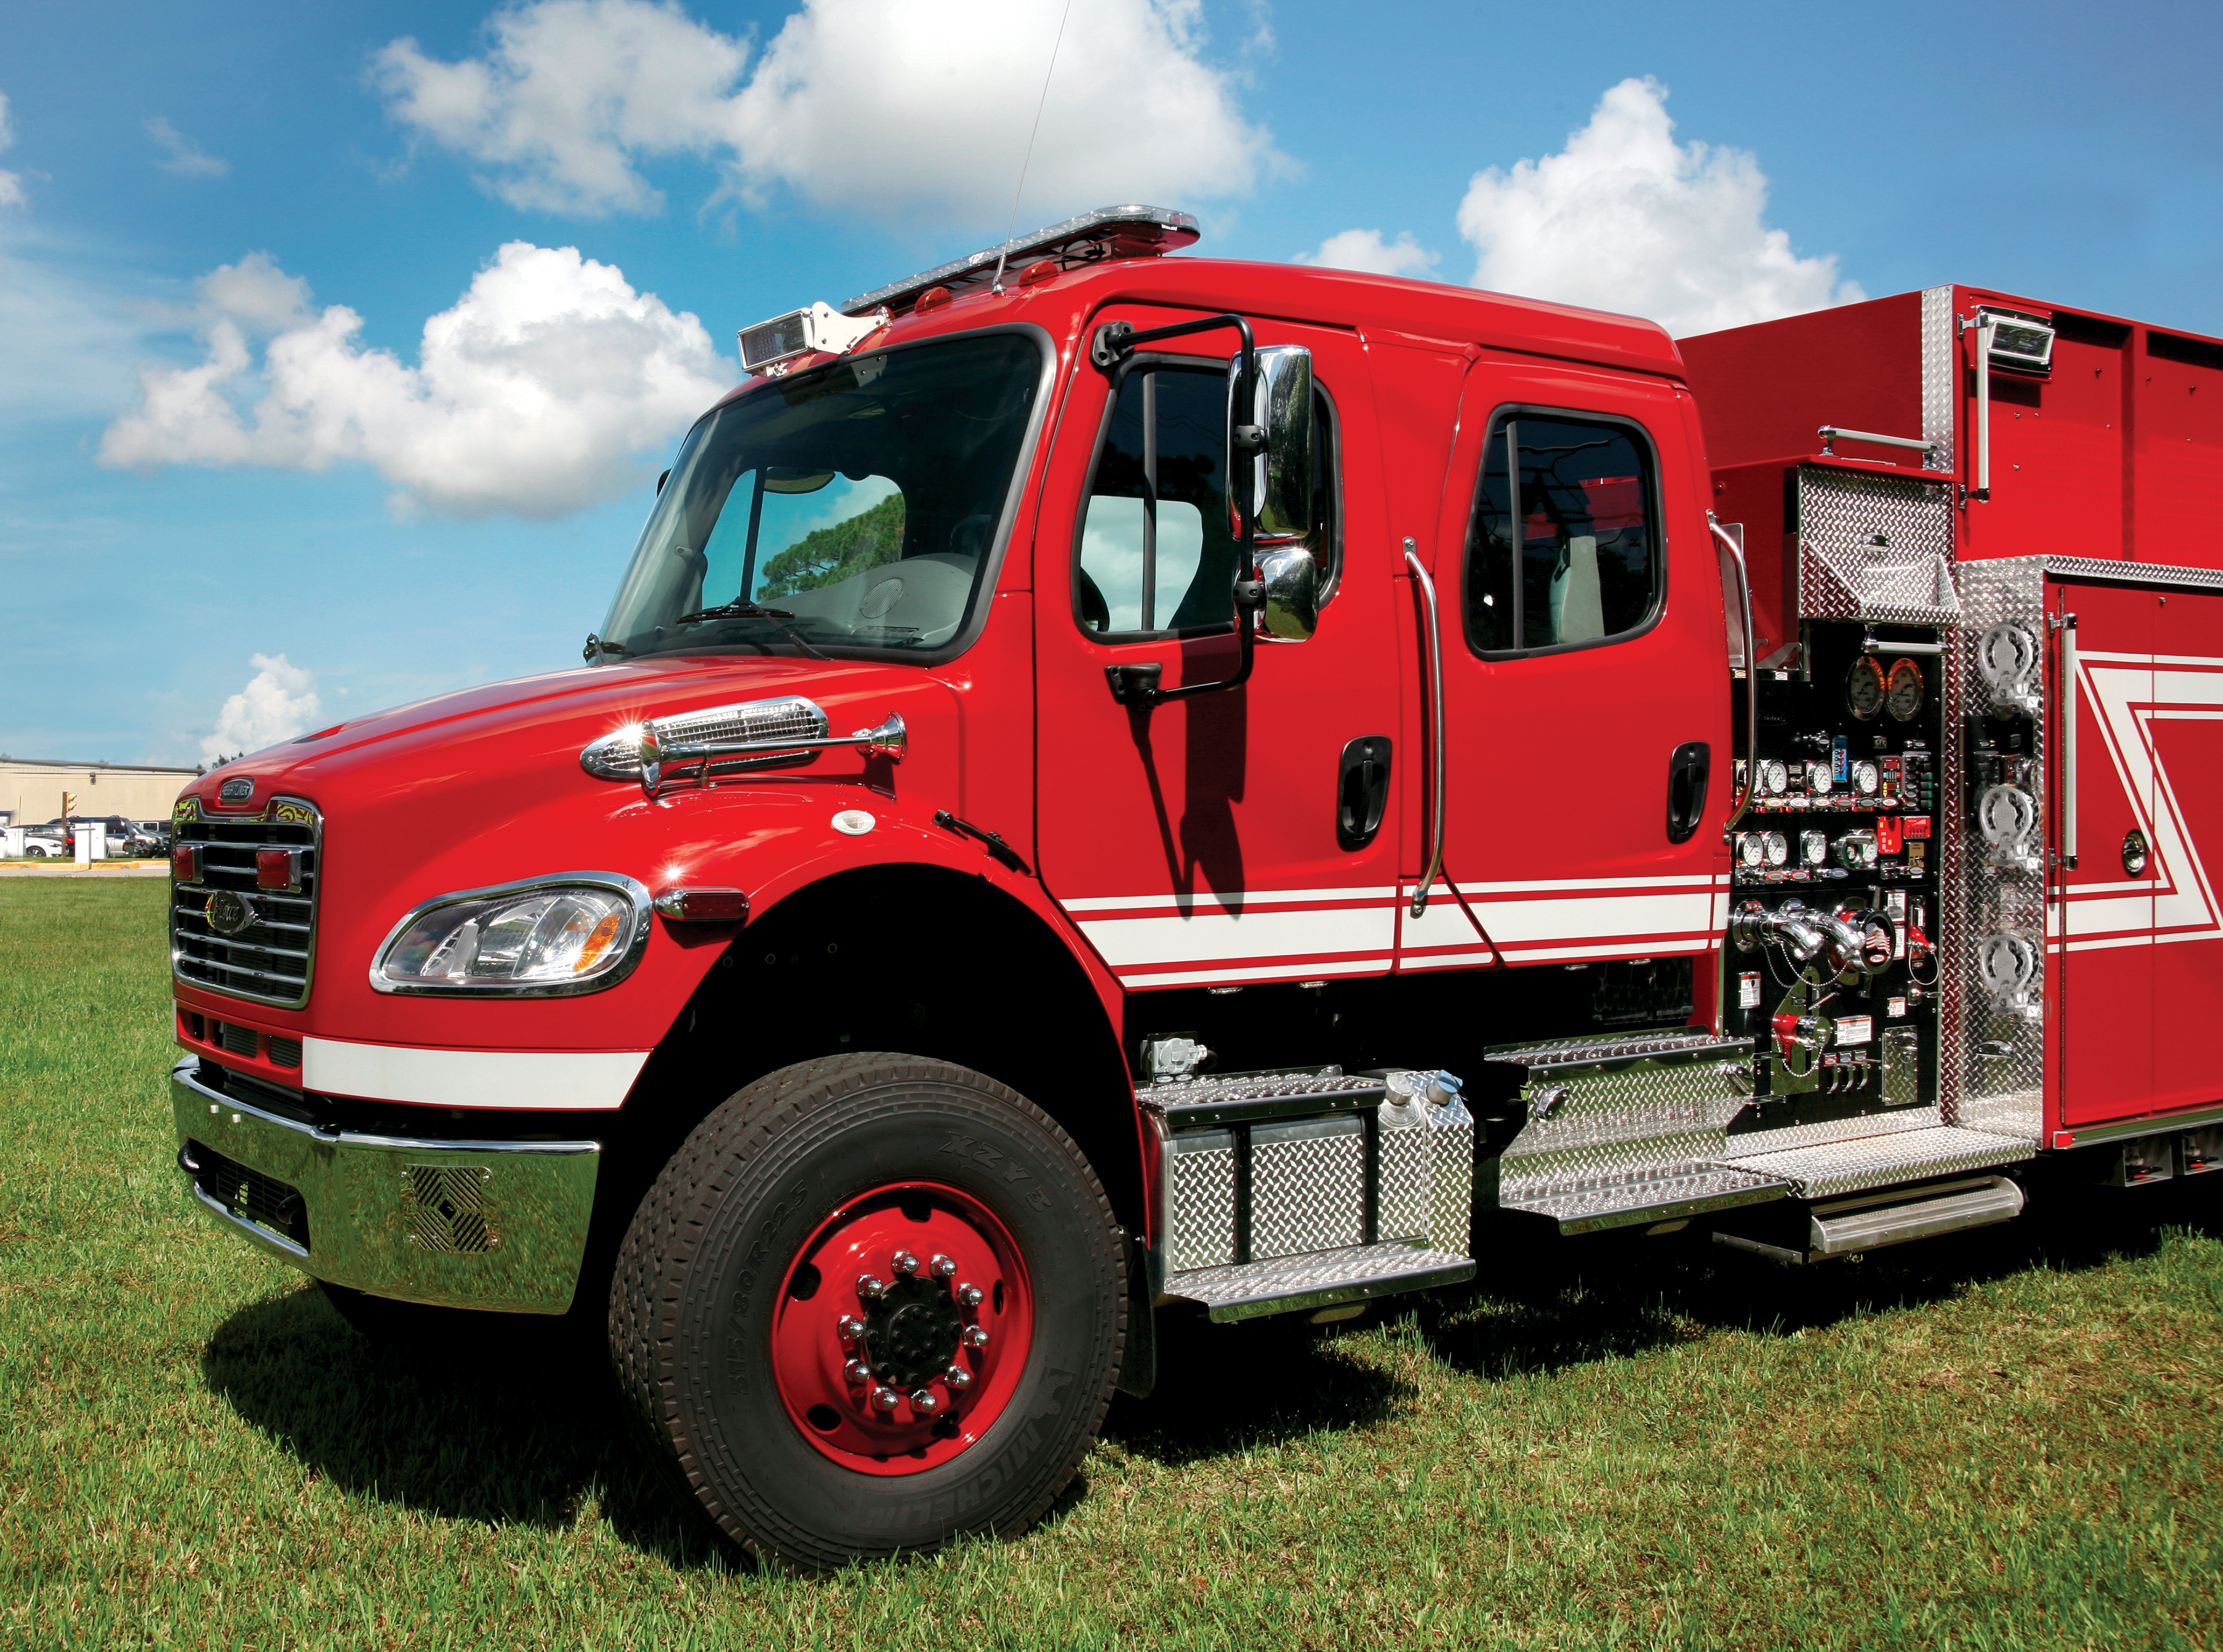 Pierce Freightliner Commercial Fire Truck Chassis Cab